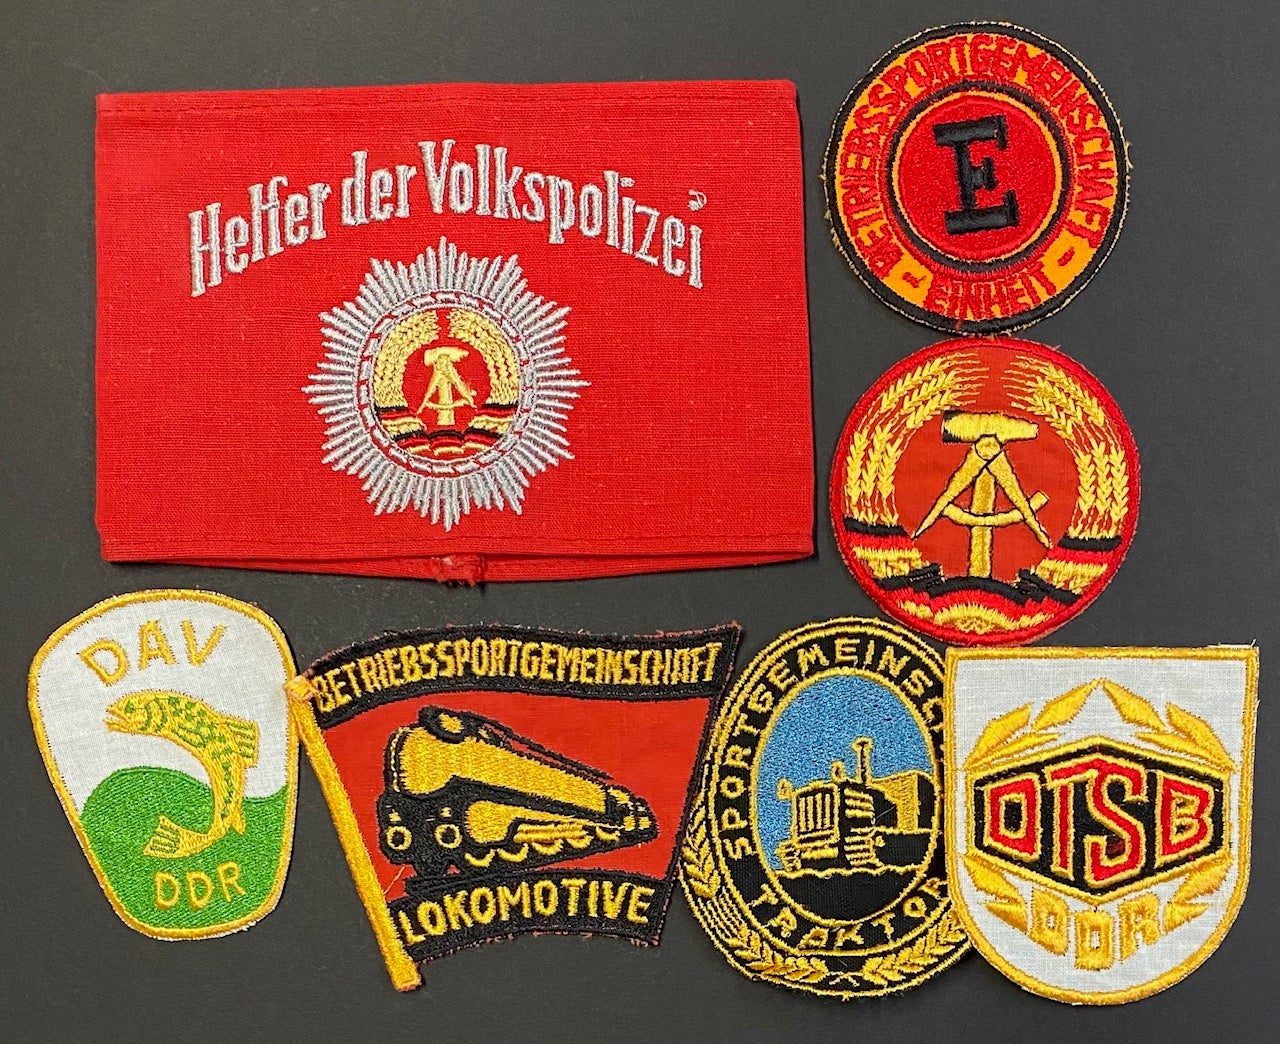 Helfer der armband East for together six with of German sorts various volkspolizei helper, an civilian patches police